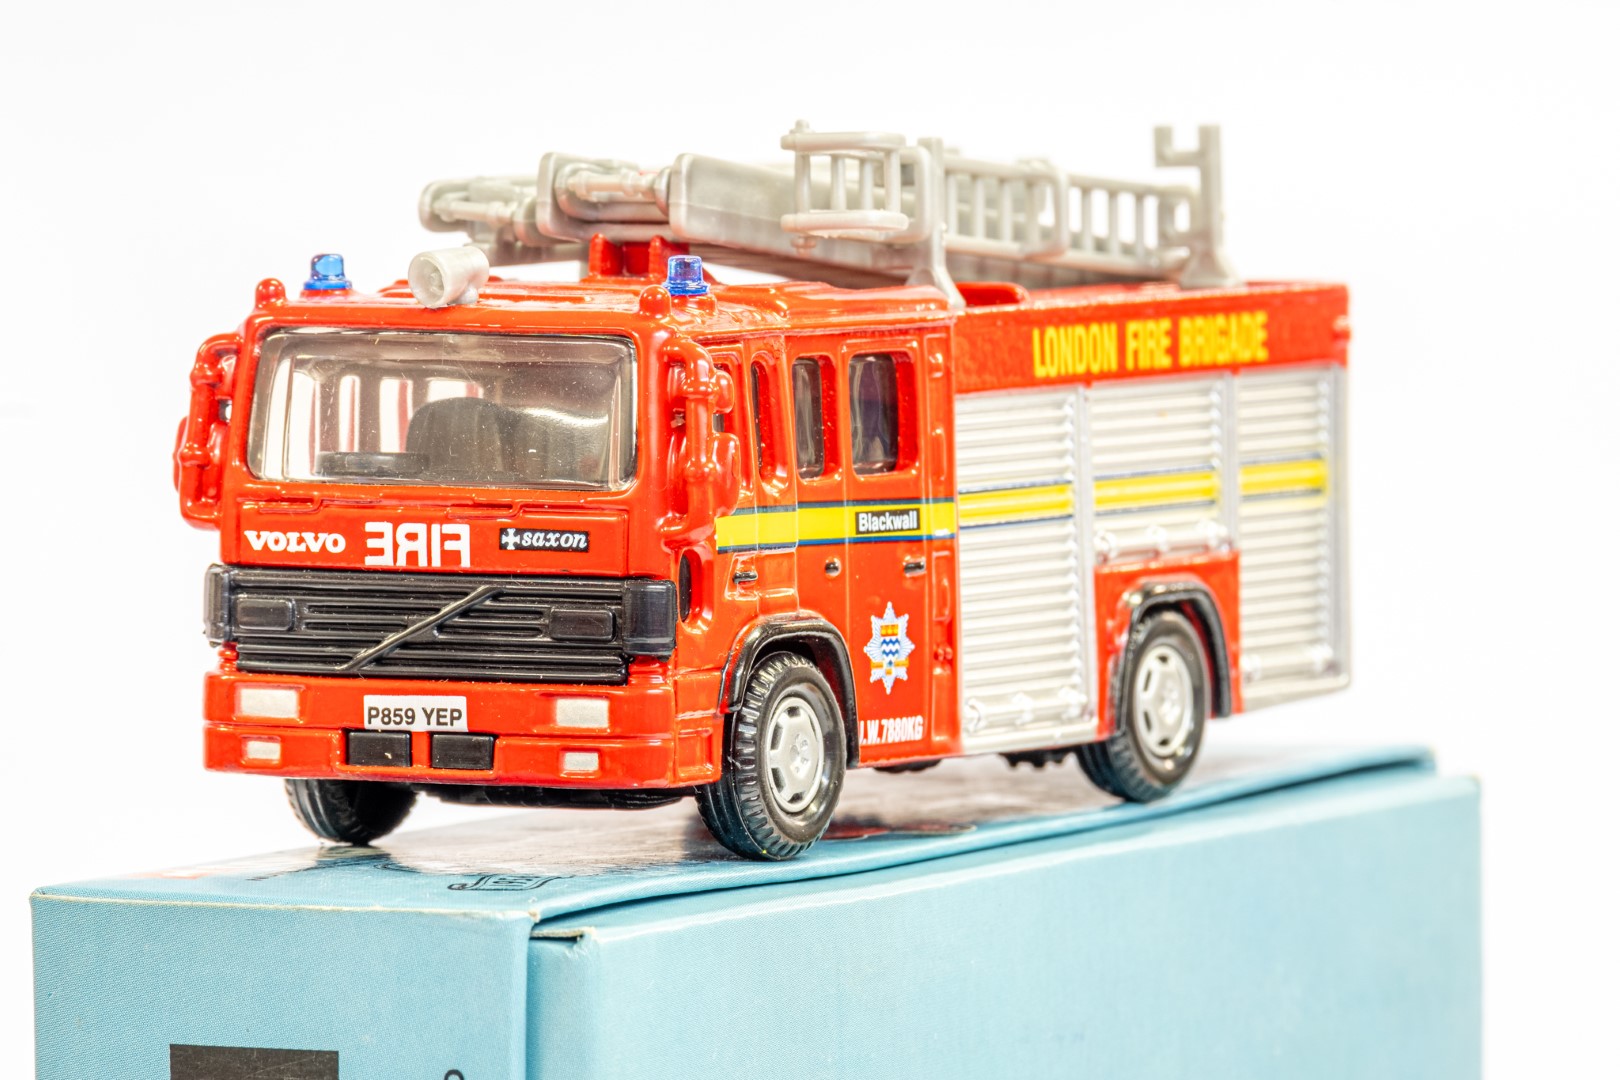 Lledo Volvo Fire Engine - Londons Burning TV Show - In Wrong Box - Image 4 of 7